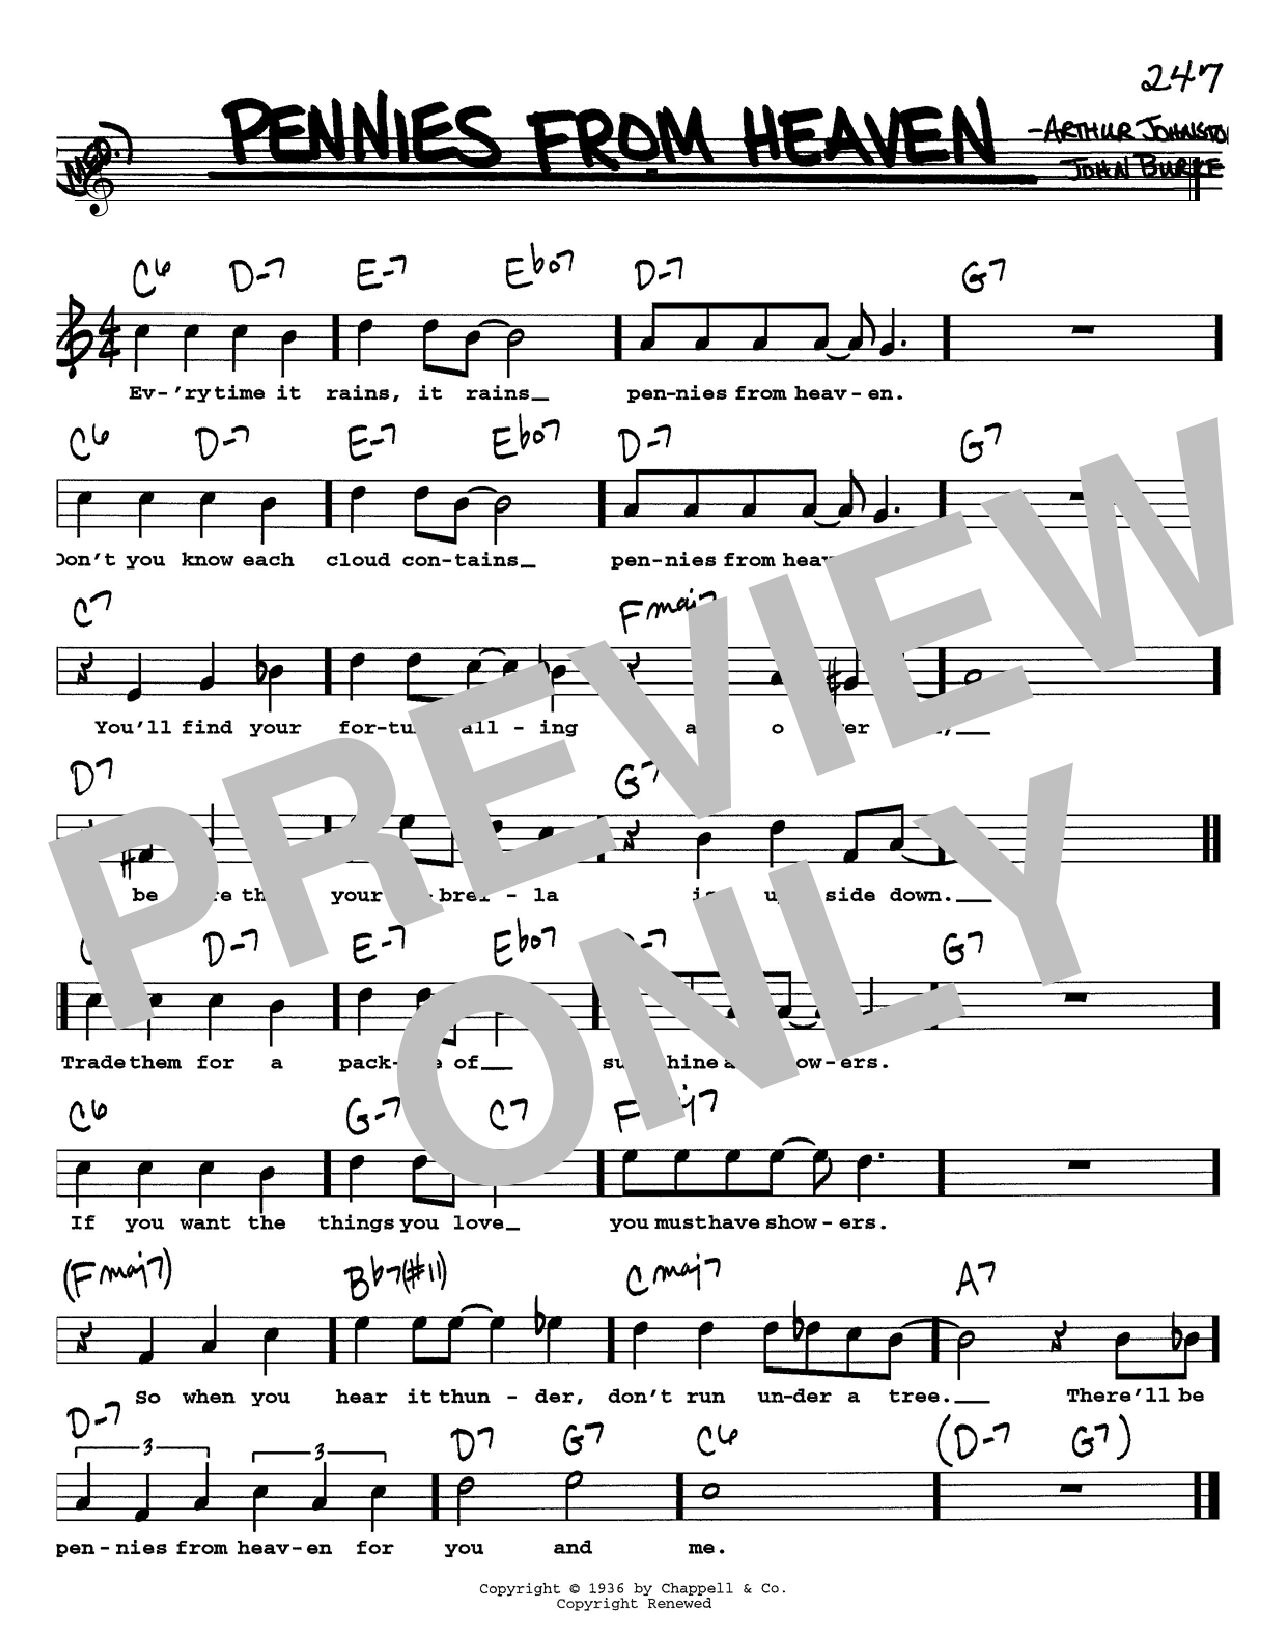 Bing Crosby Pennies From Heaven sheet music notes and chords. Download Printable PDF.